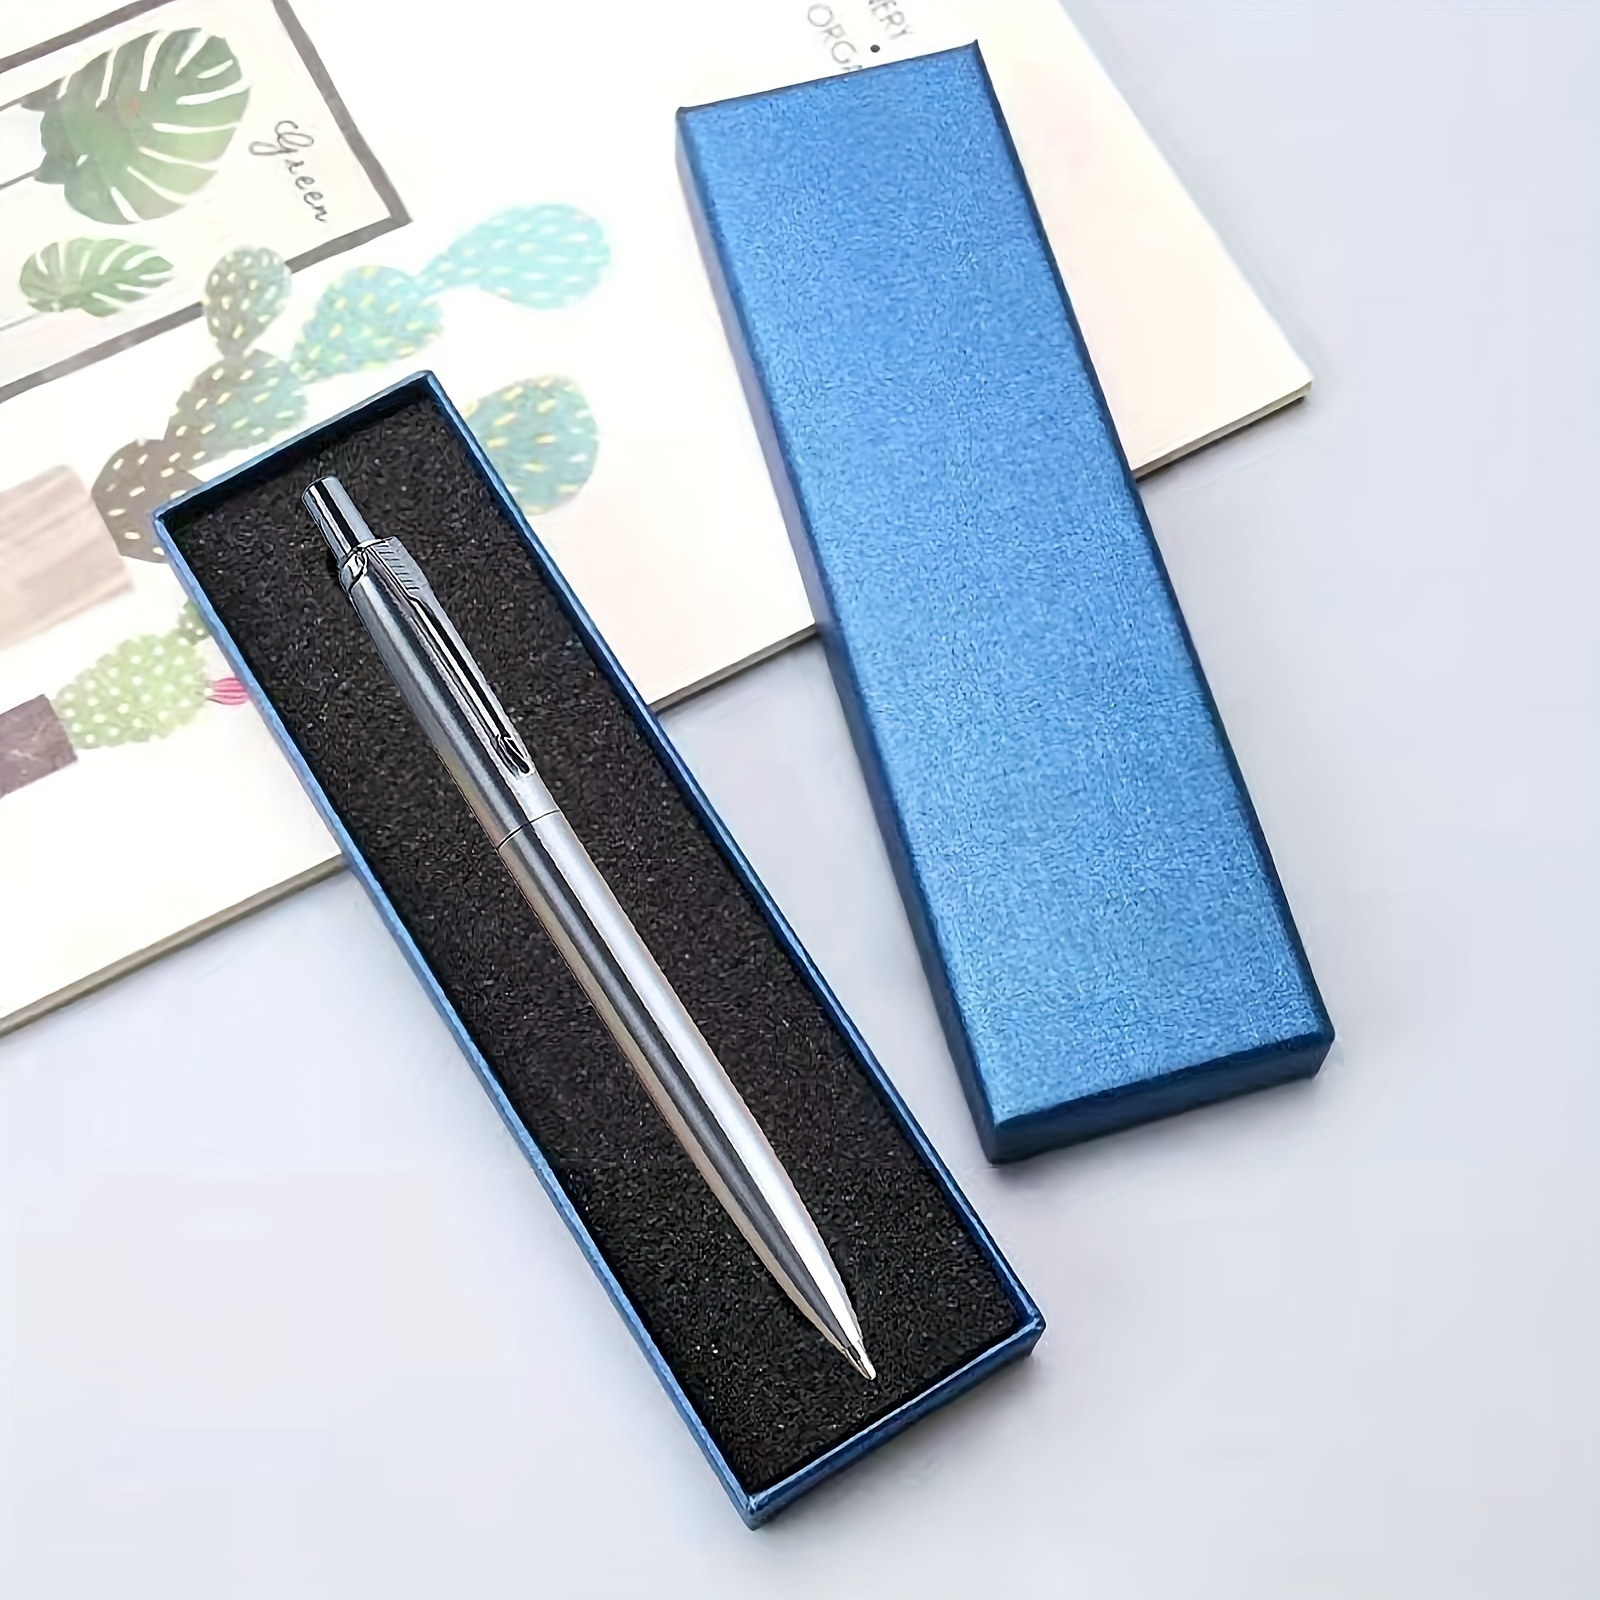 

1pc Multi-purpose Press Type Pen - 1mm Tip, Black Ink, Metal Pen Rod, Smooth Writing - With Gift Box Packaging, Suitable For Birthday, Christmas Gifts And Office Writing, Personal Journal.